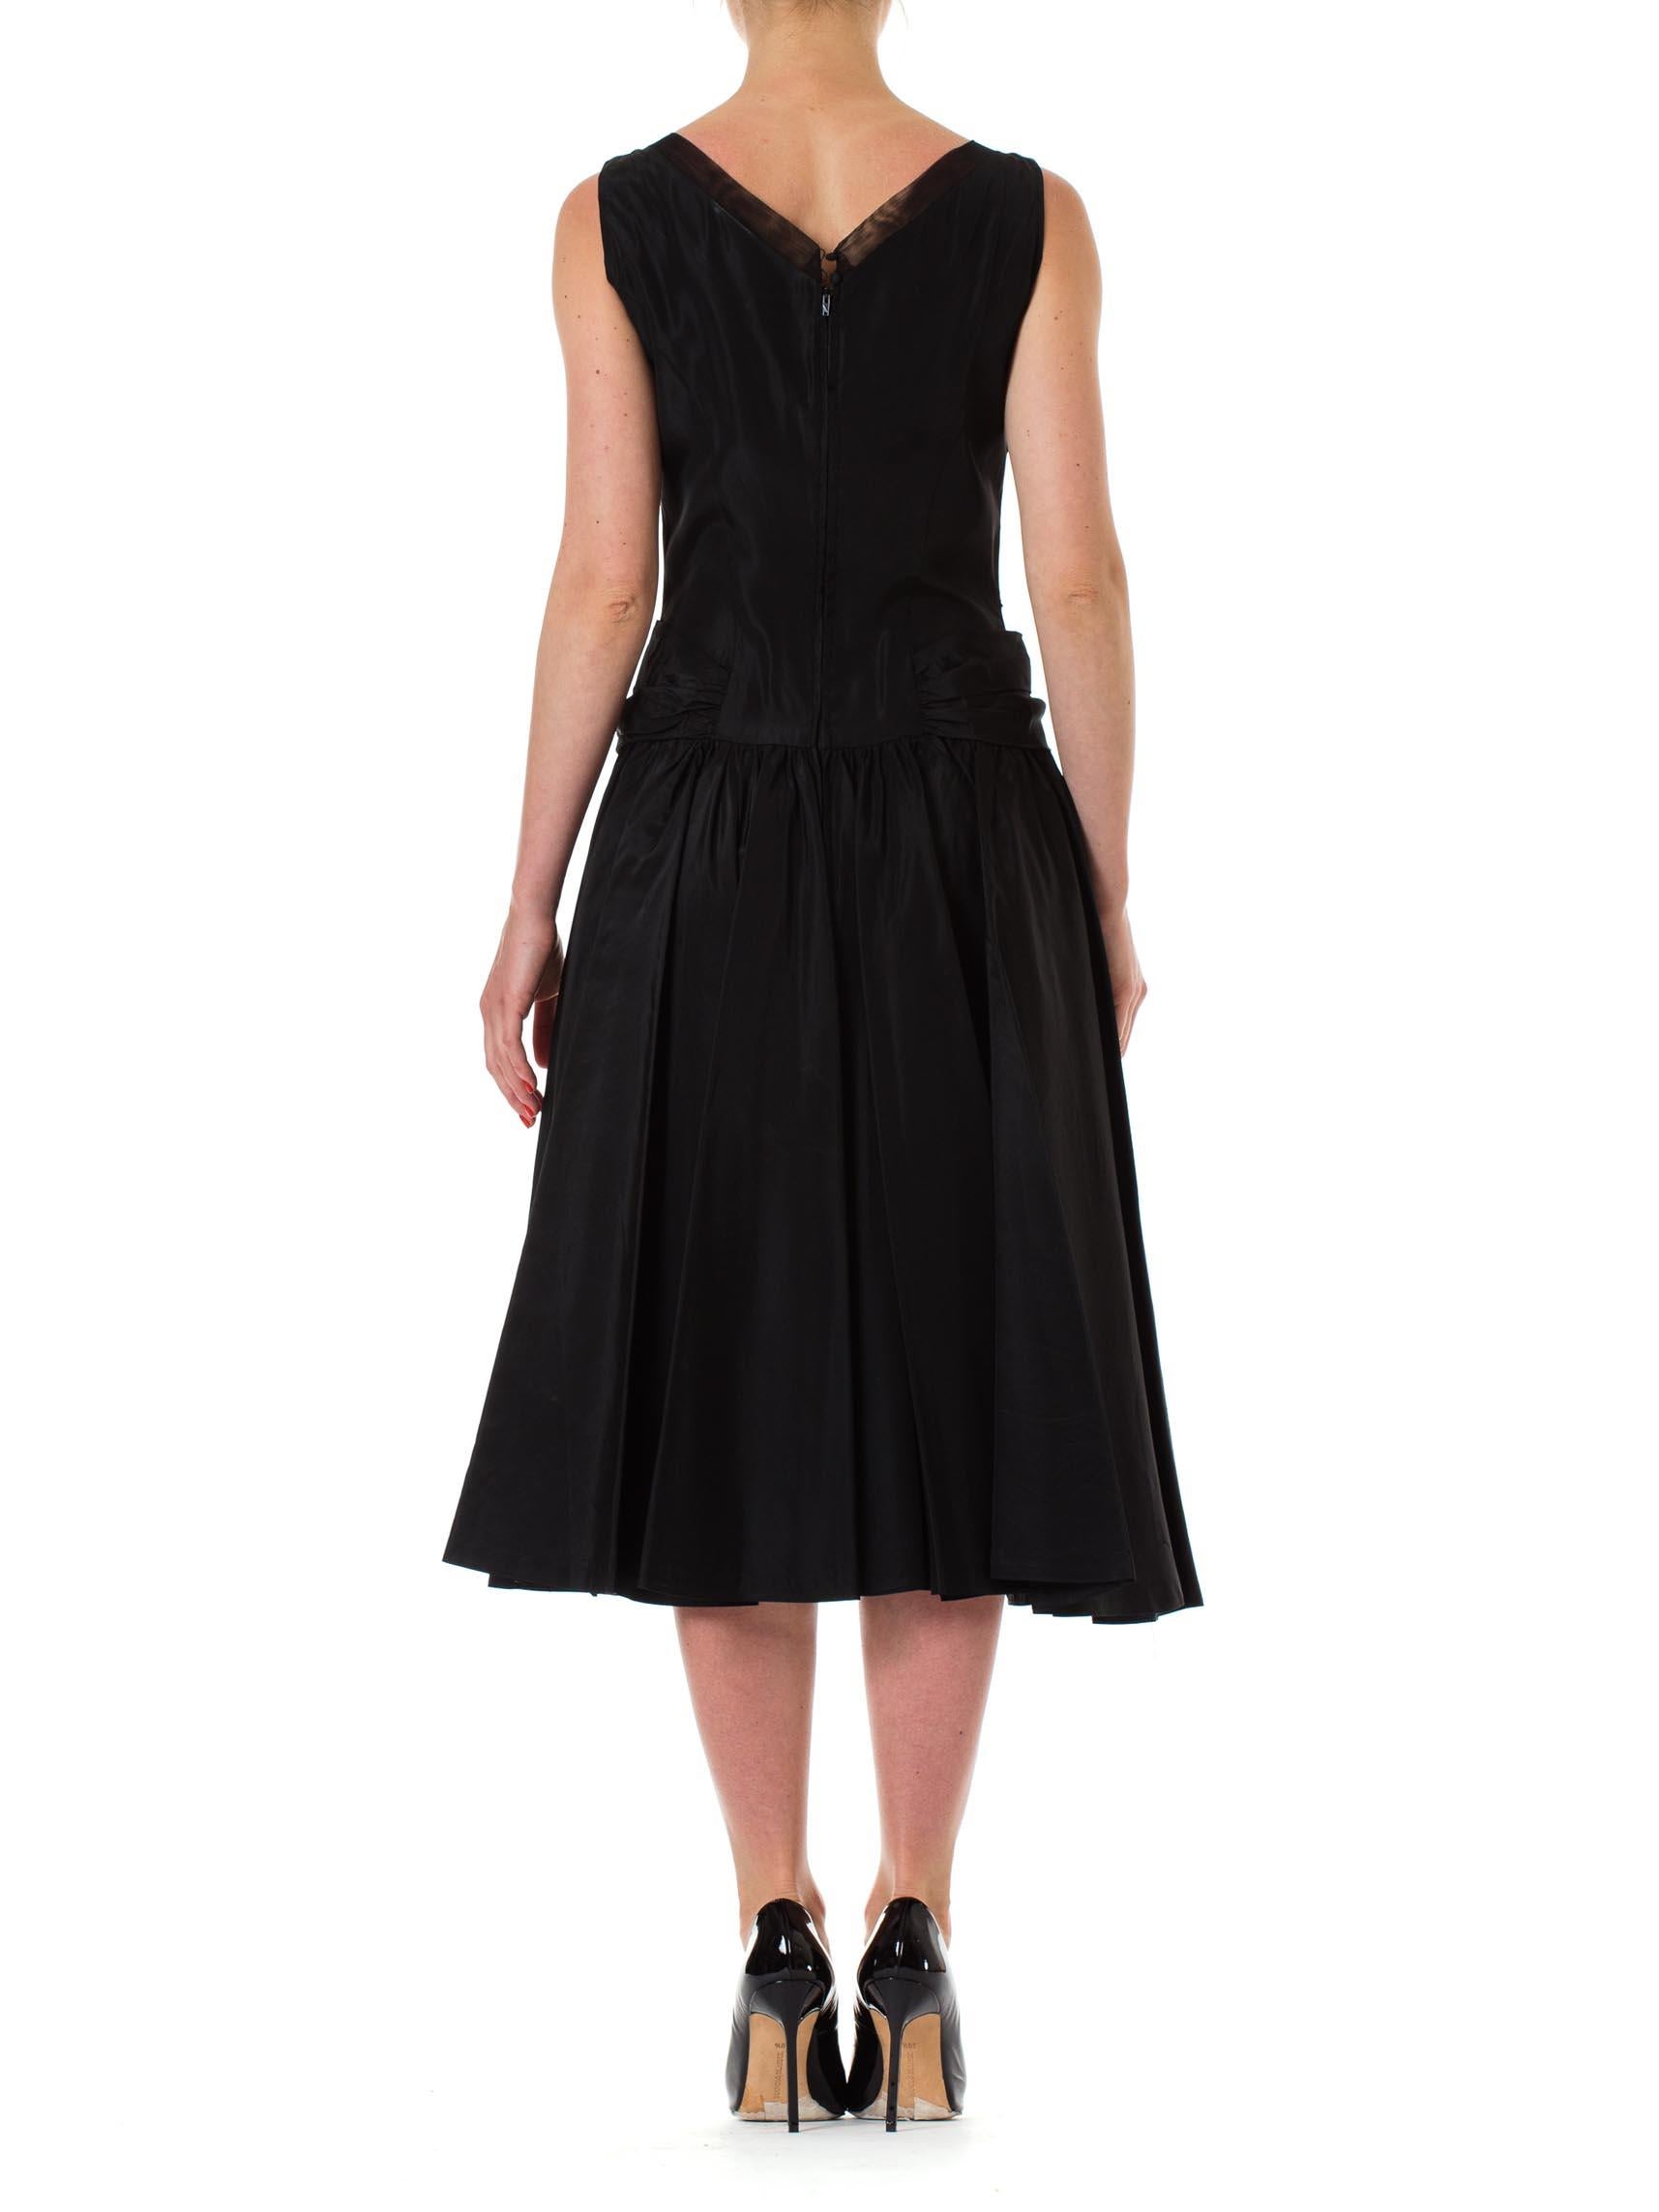 1950S Black Acetate Taffeta Swing Skirt Cocktail Dress With Unique Gathered Det In Excellent Condition For Sale In New York, NY